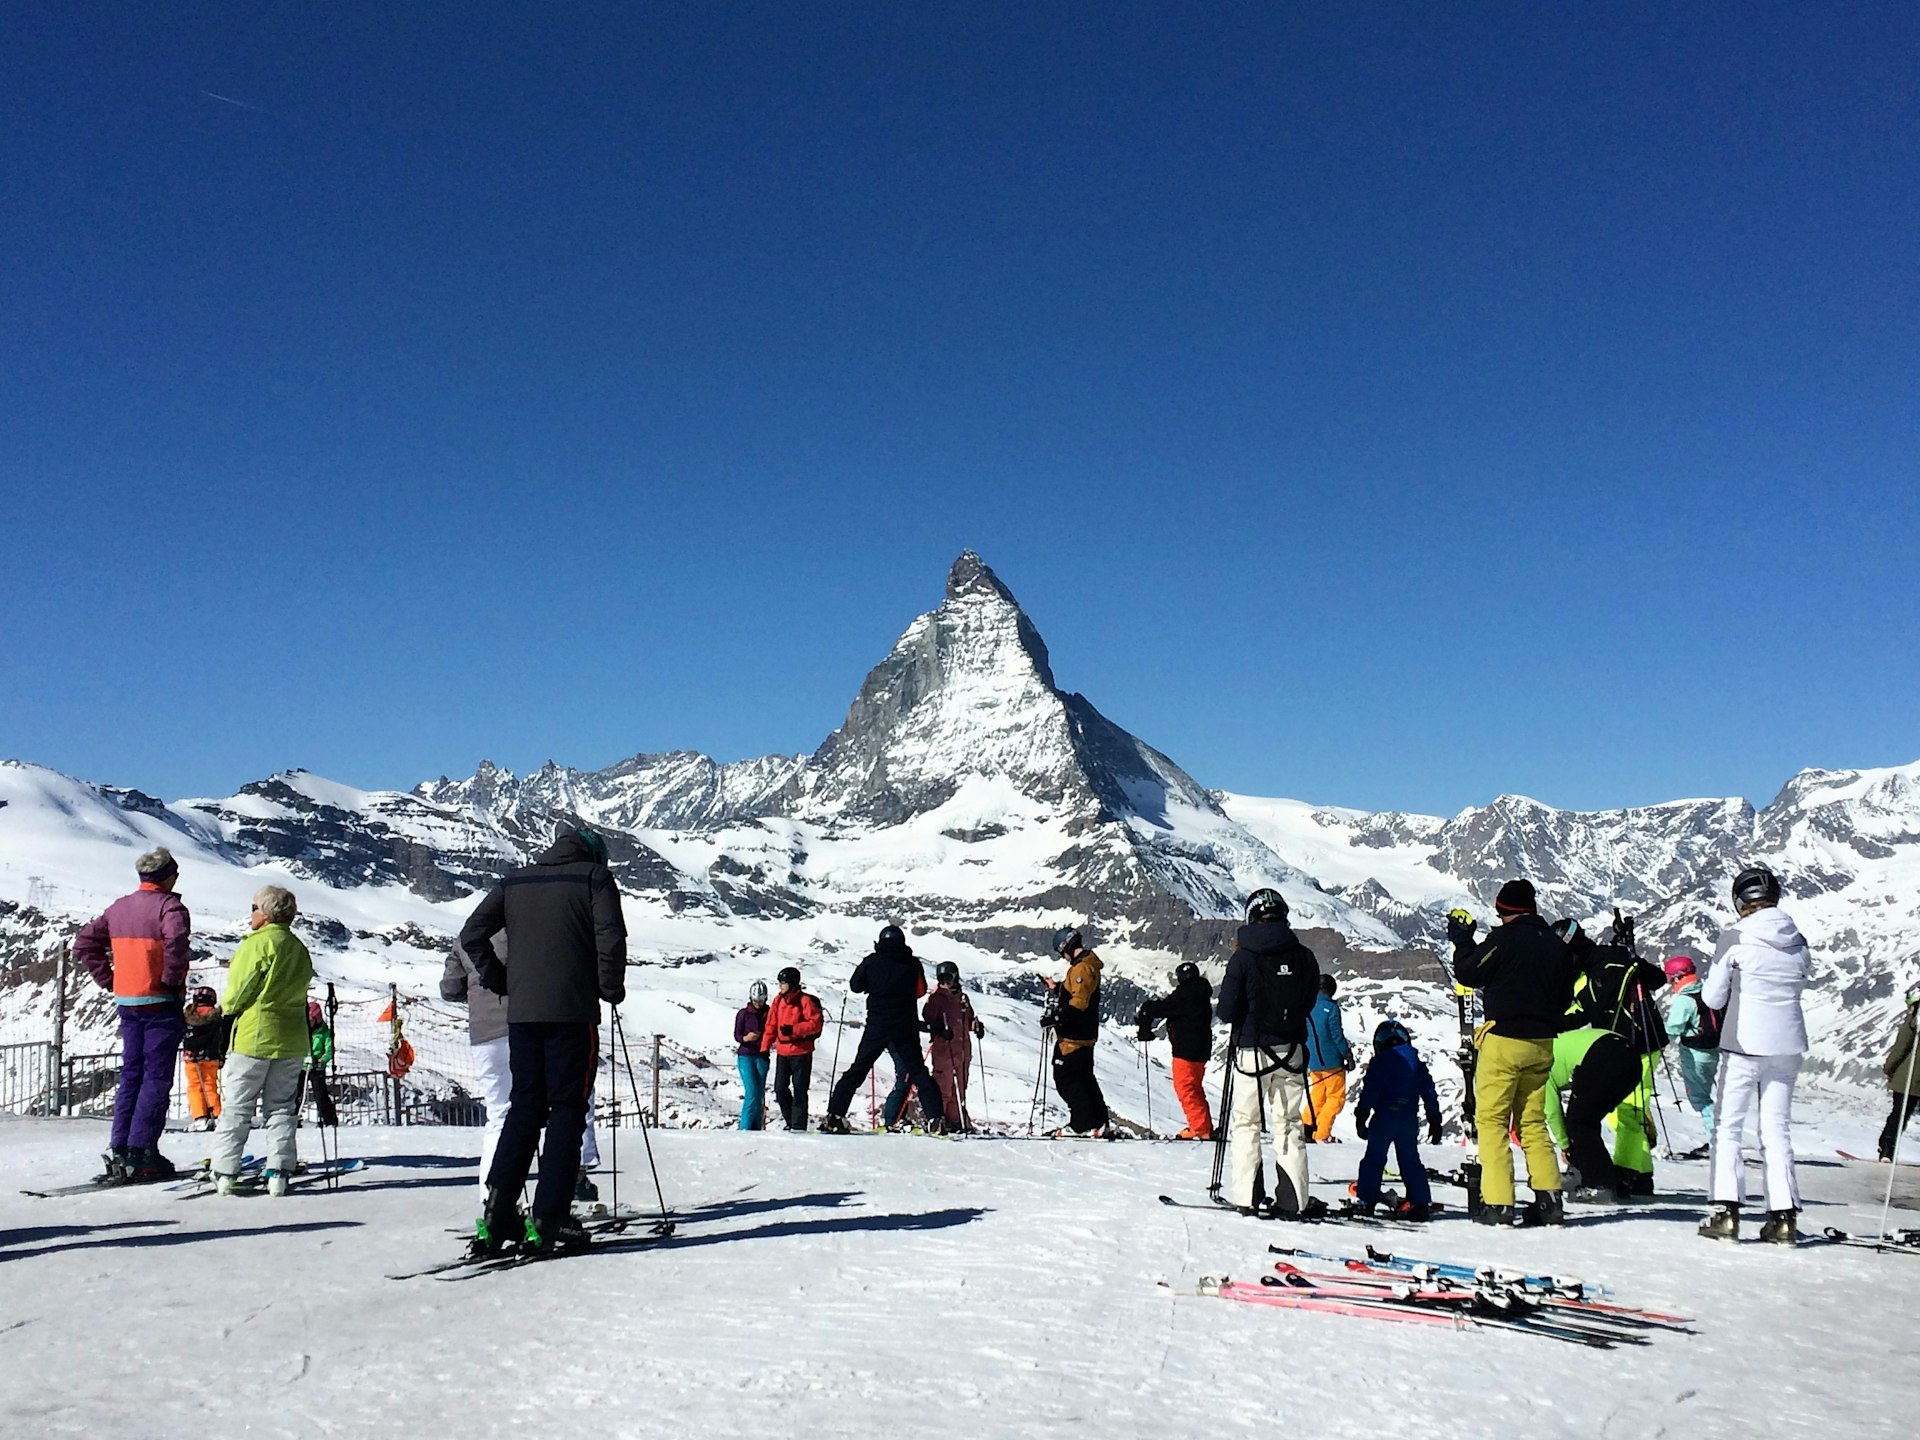 Skiers prepare to go down from the Gornergrat mountain with the Matterhorn mountain in the background